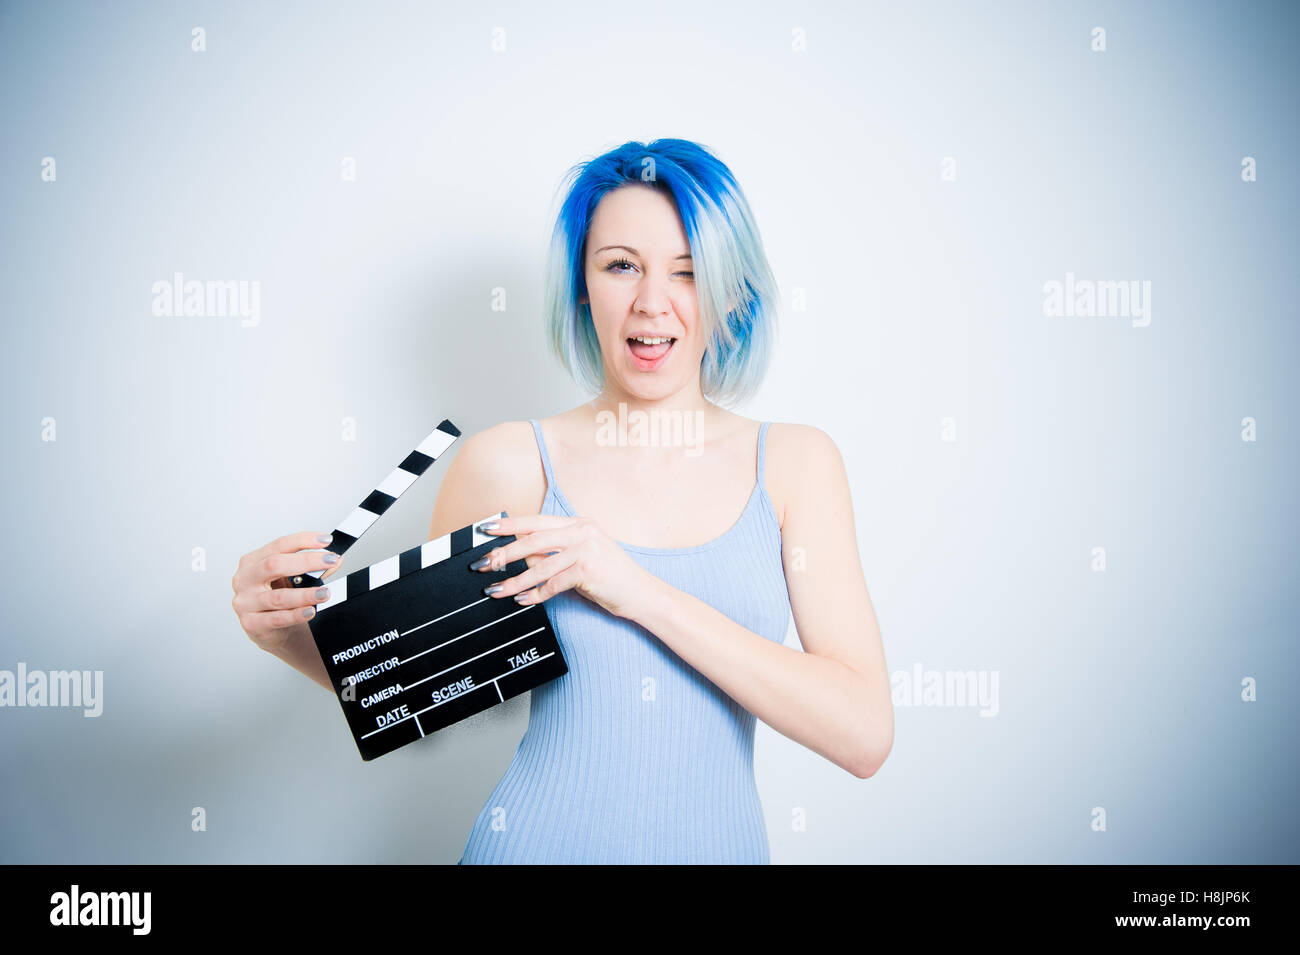 Teen alternative hipster girl smiling and wink with movie clapper board for actress audition Stock Photo